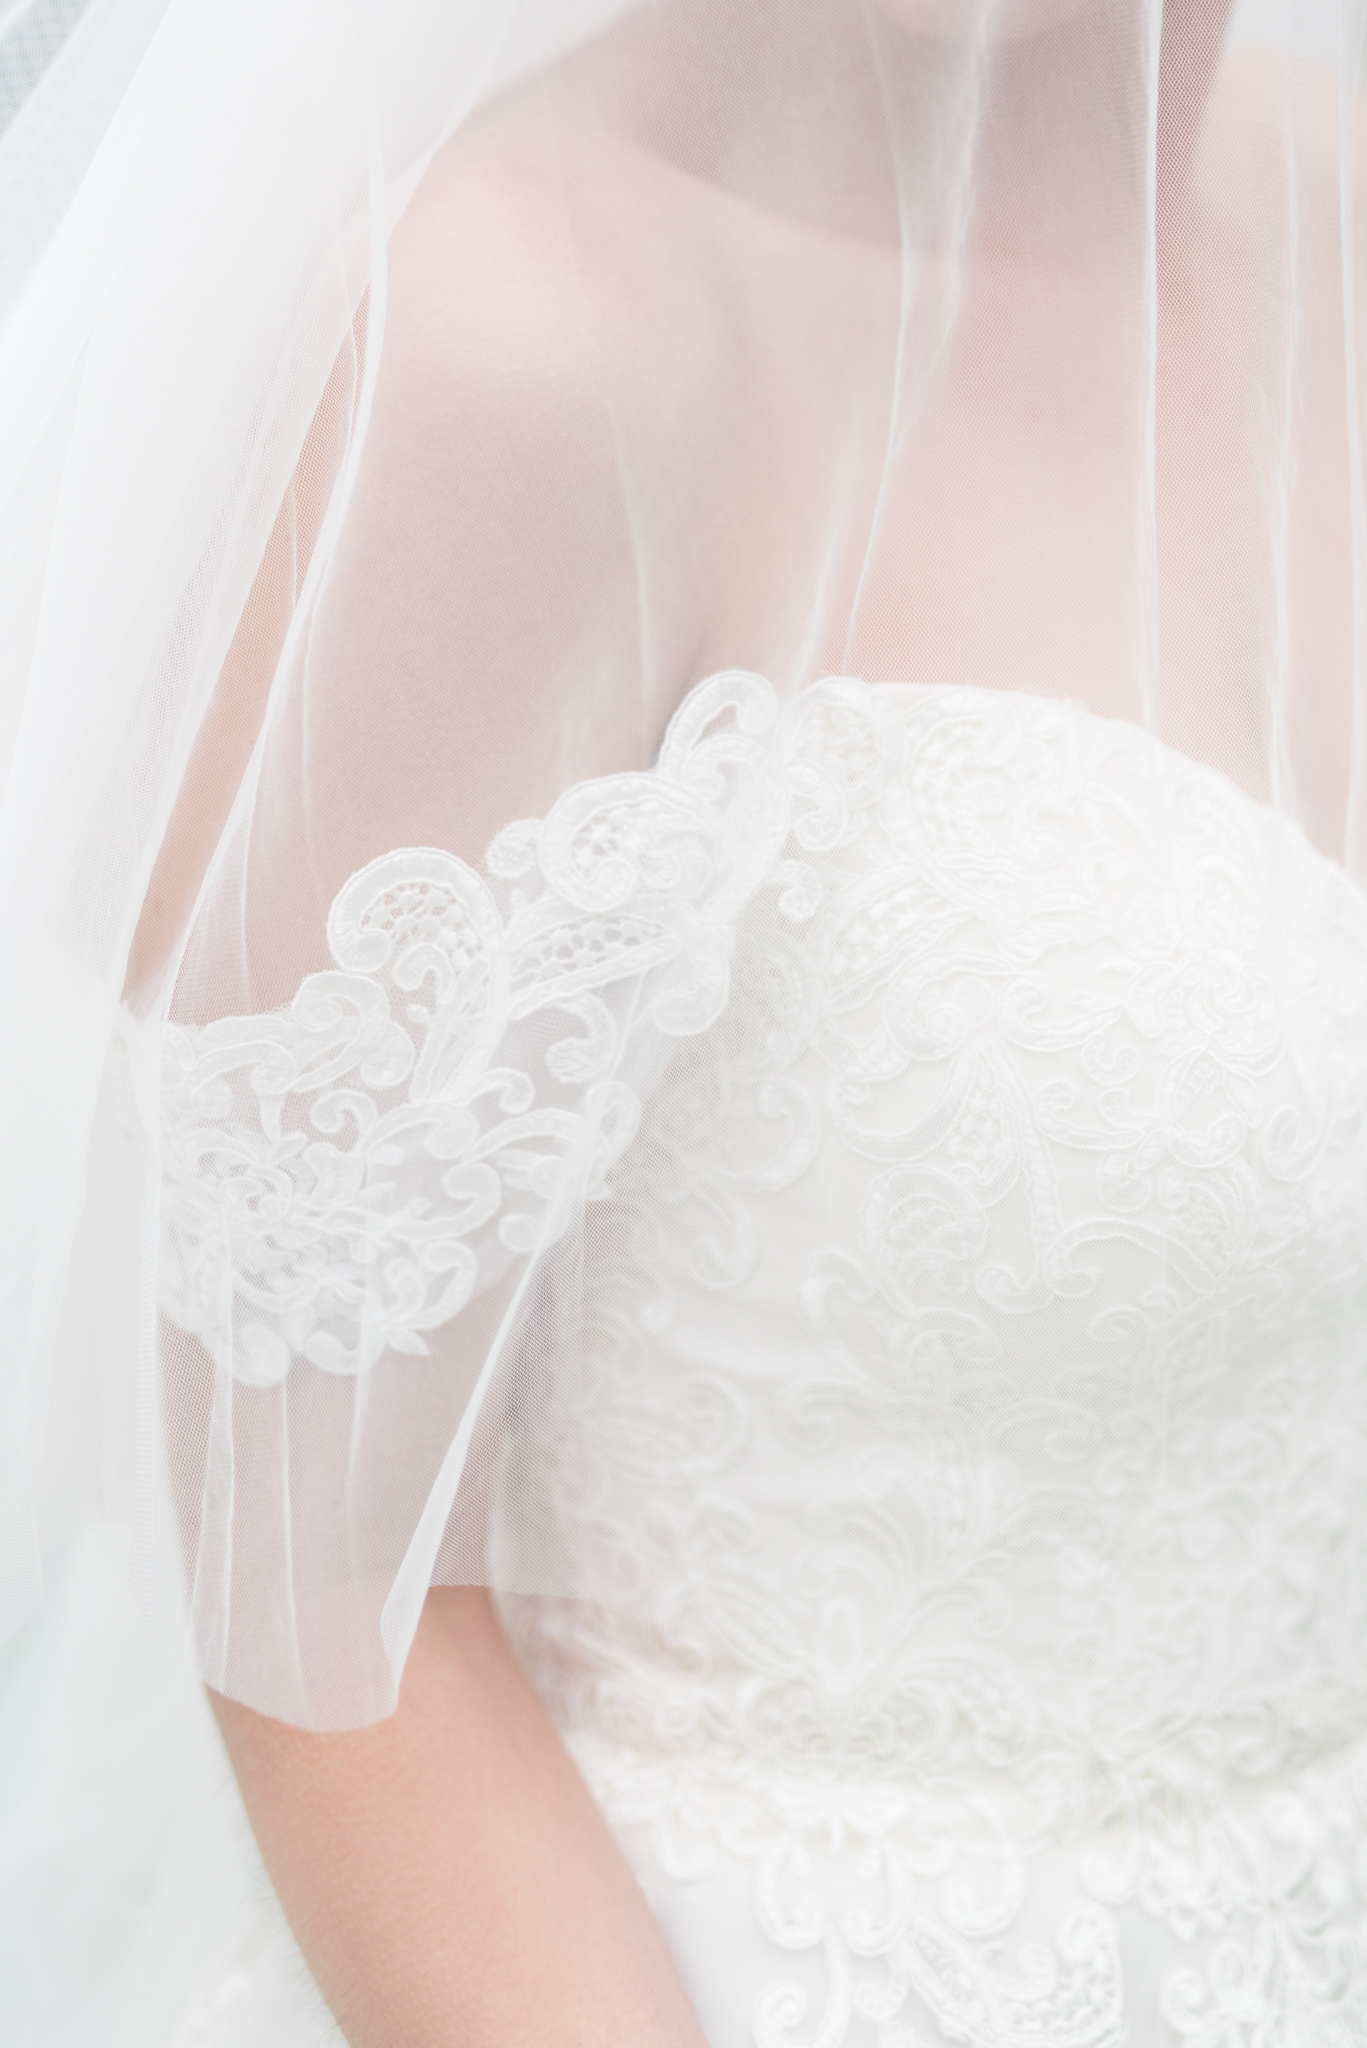 Lace details on wedding gown sleeve.